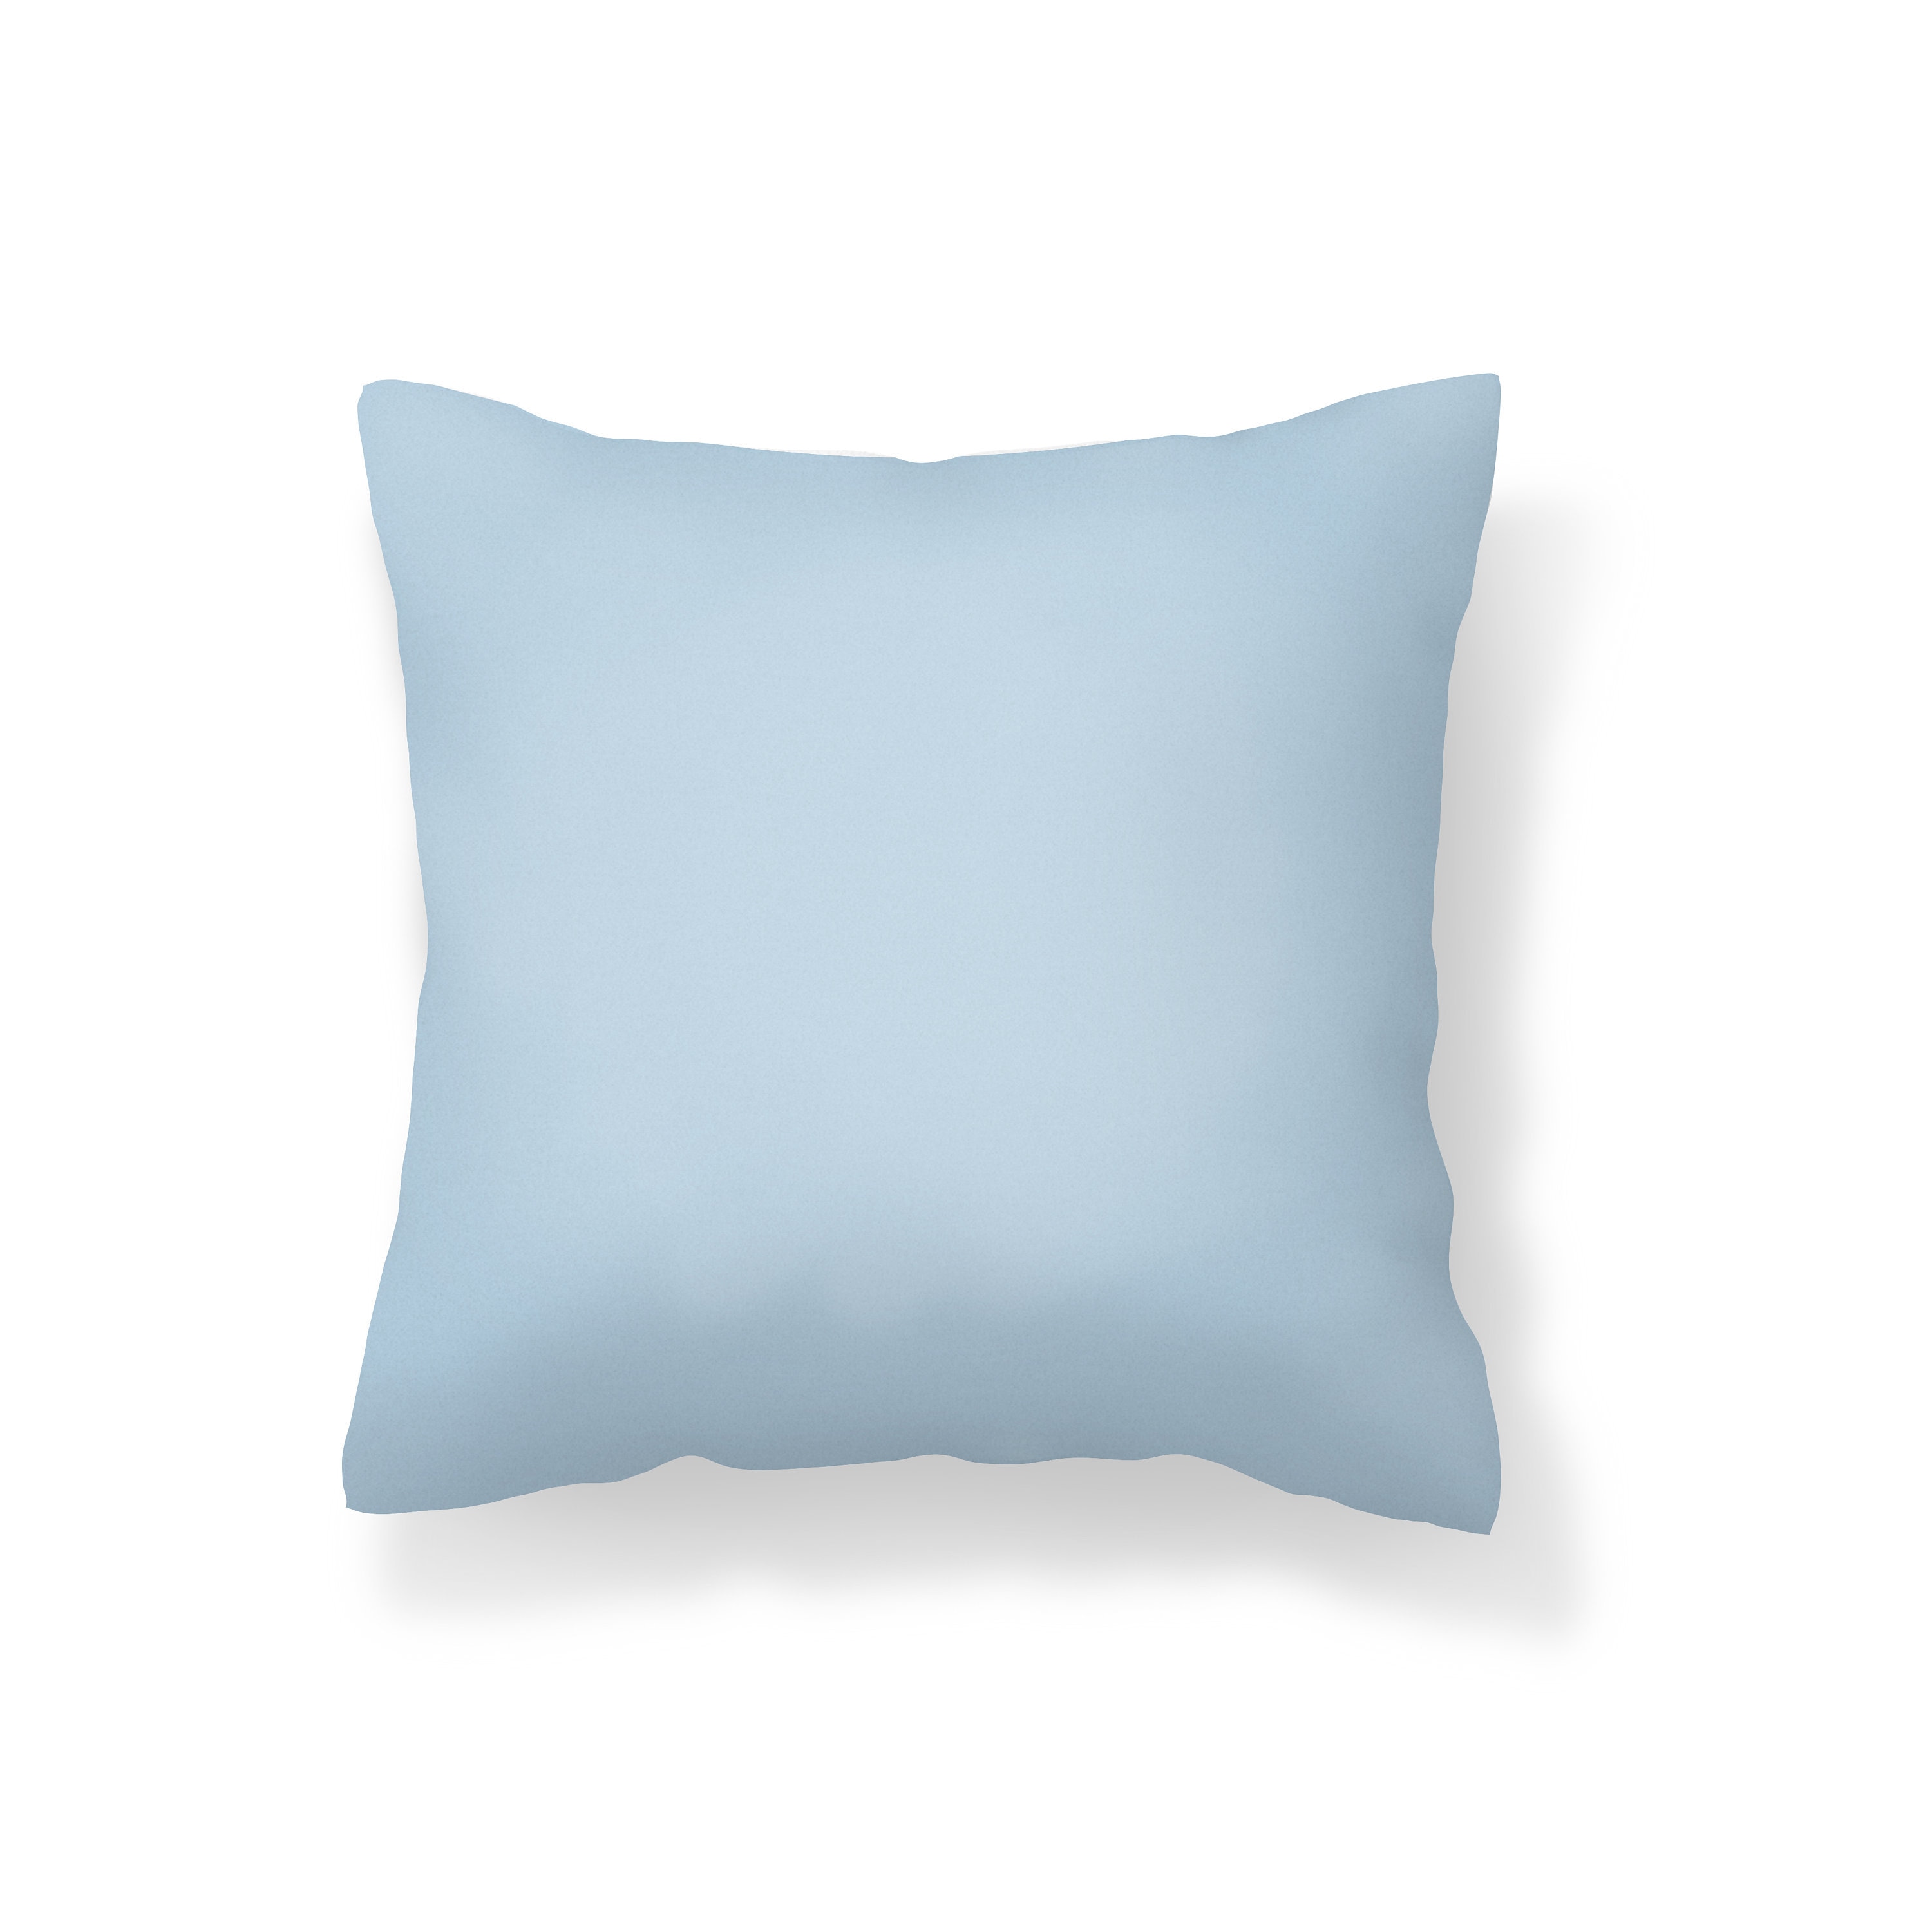 Solid Light Blue Throw Pillow Cover, Light Blue Decorative Pillow Covers